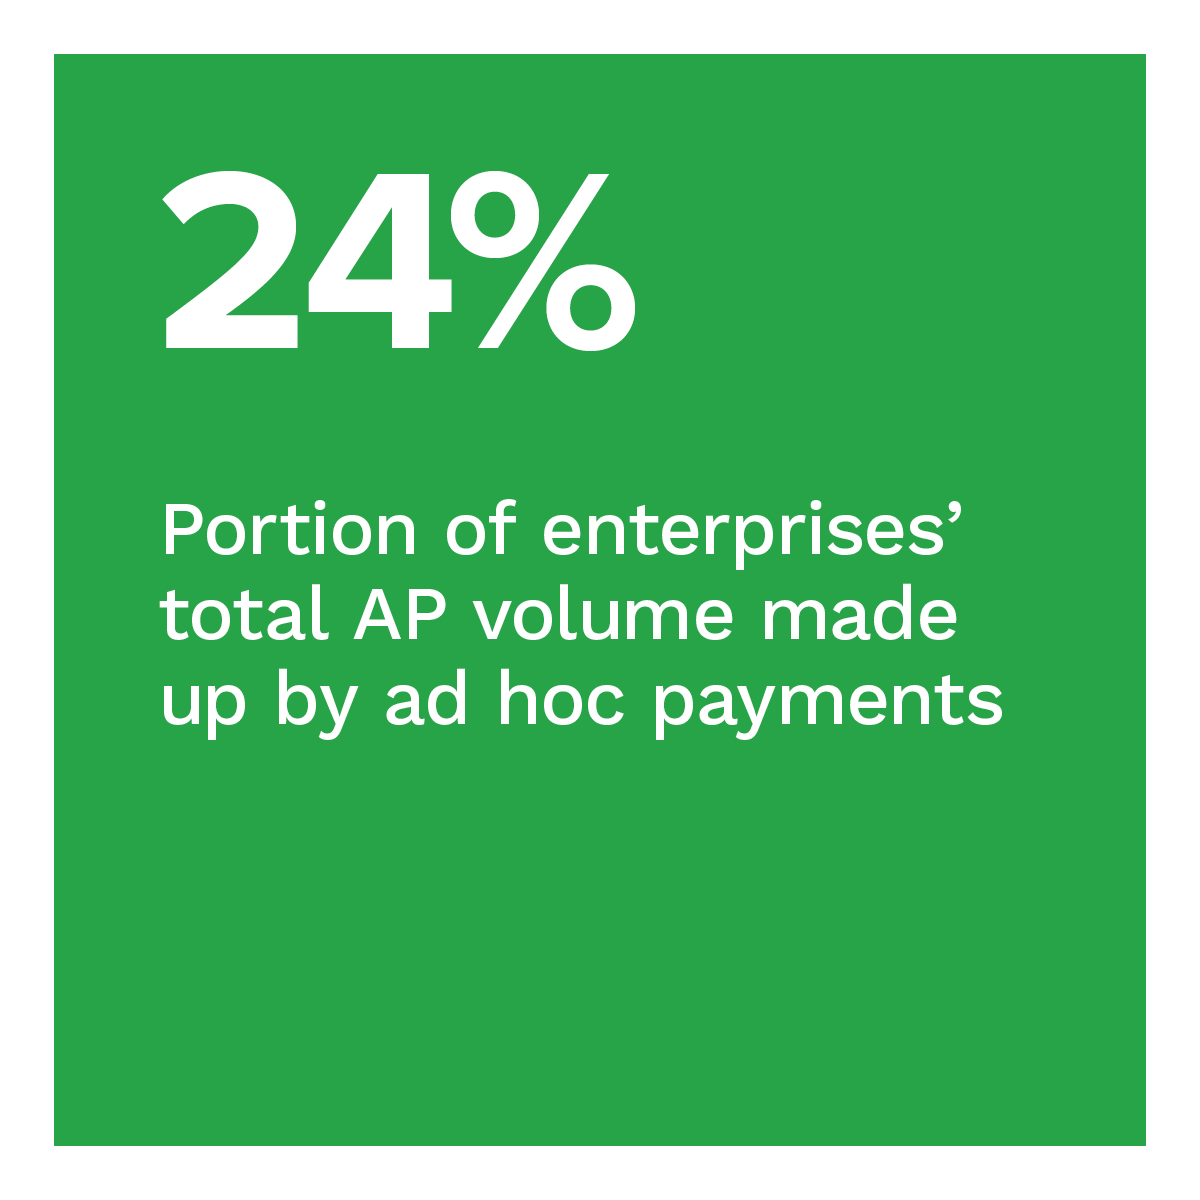 24%: Portion of enterprises’ total AP volume made up by ad hoc payments